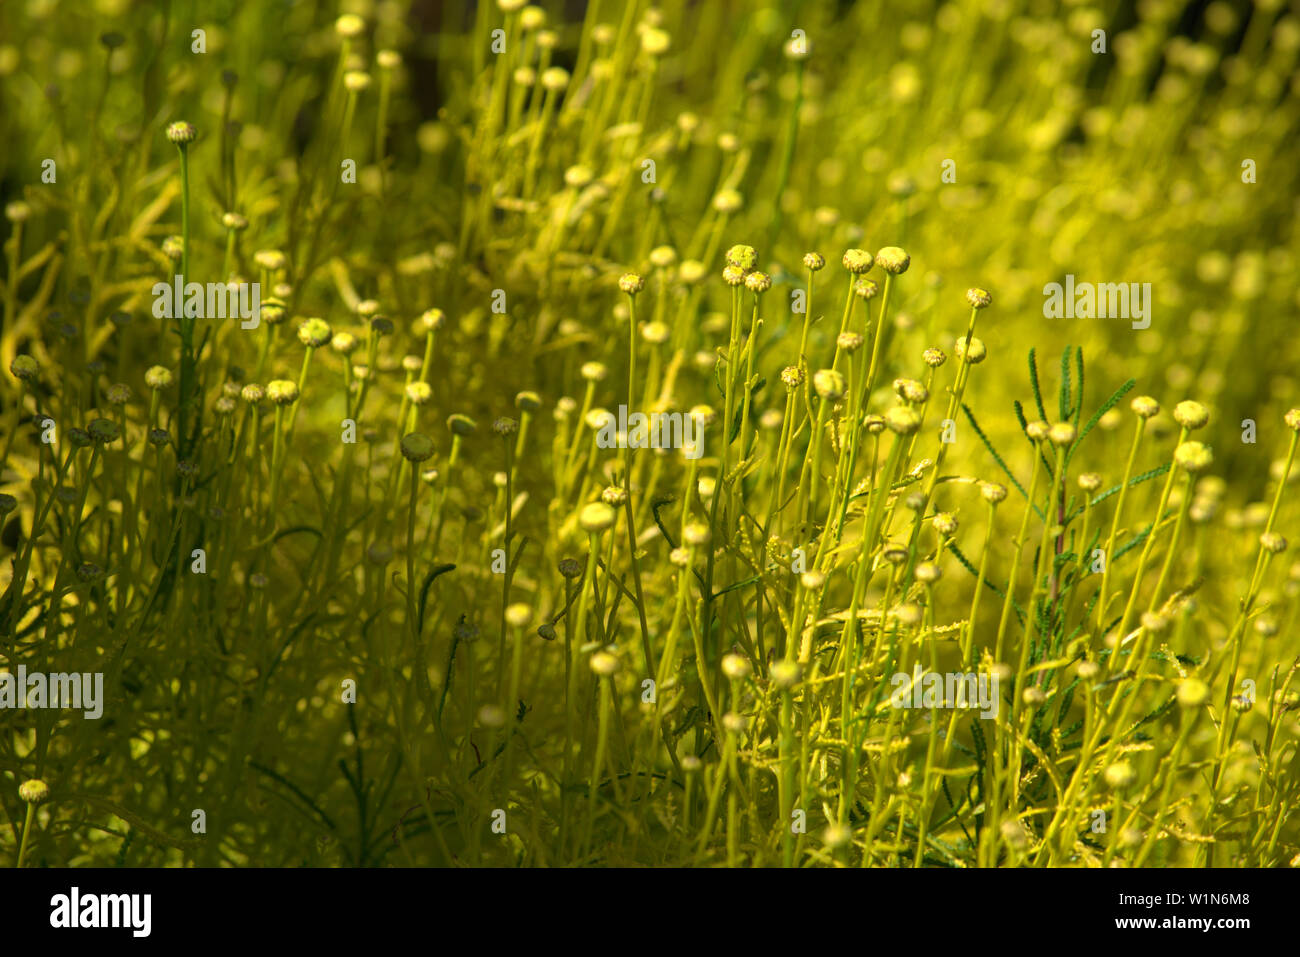 Swathes of green, a natural background image Stock Photo